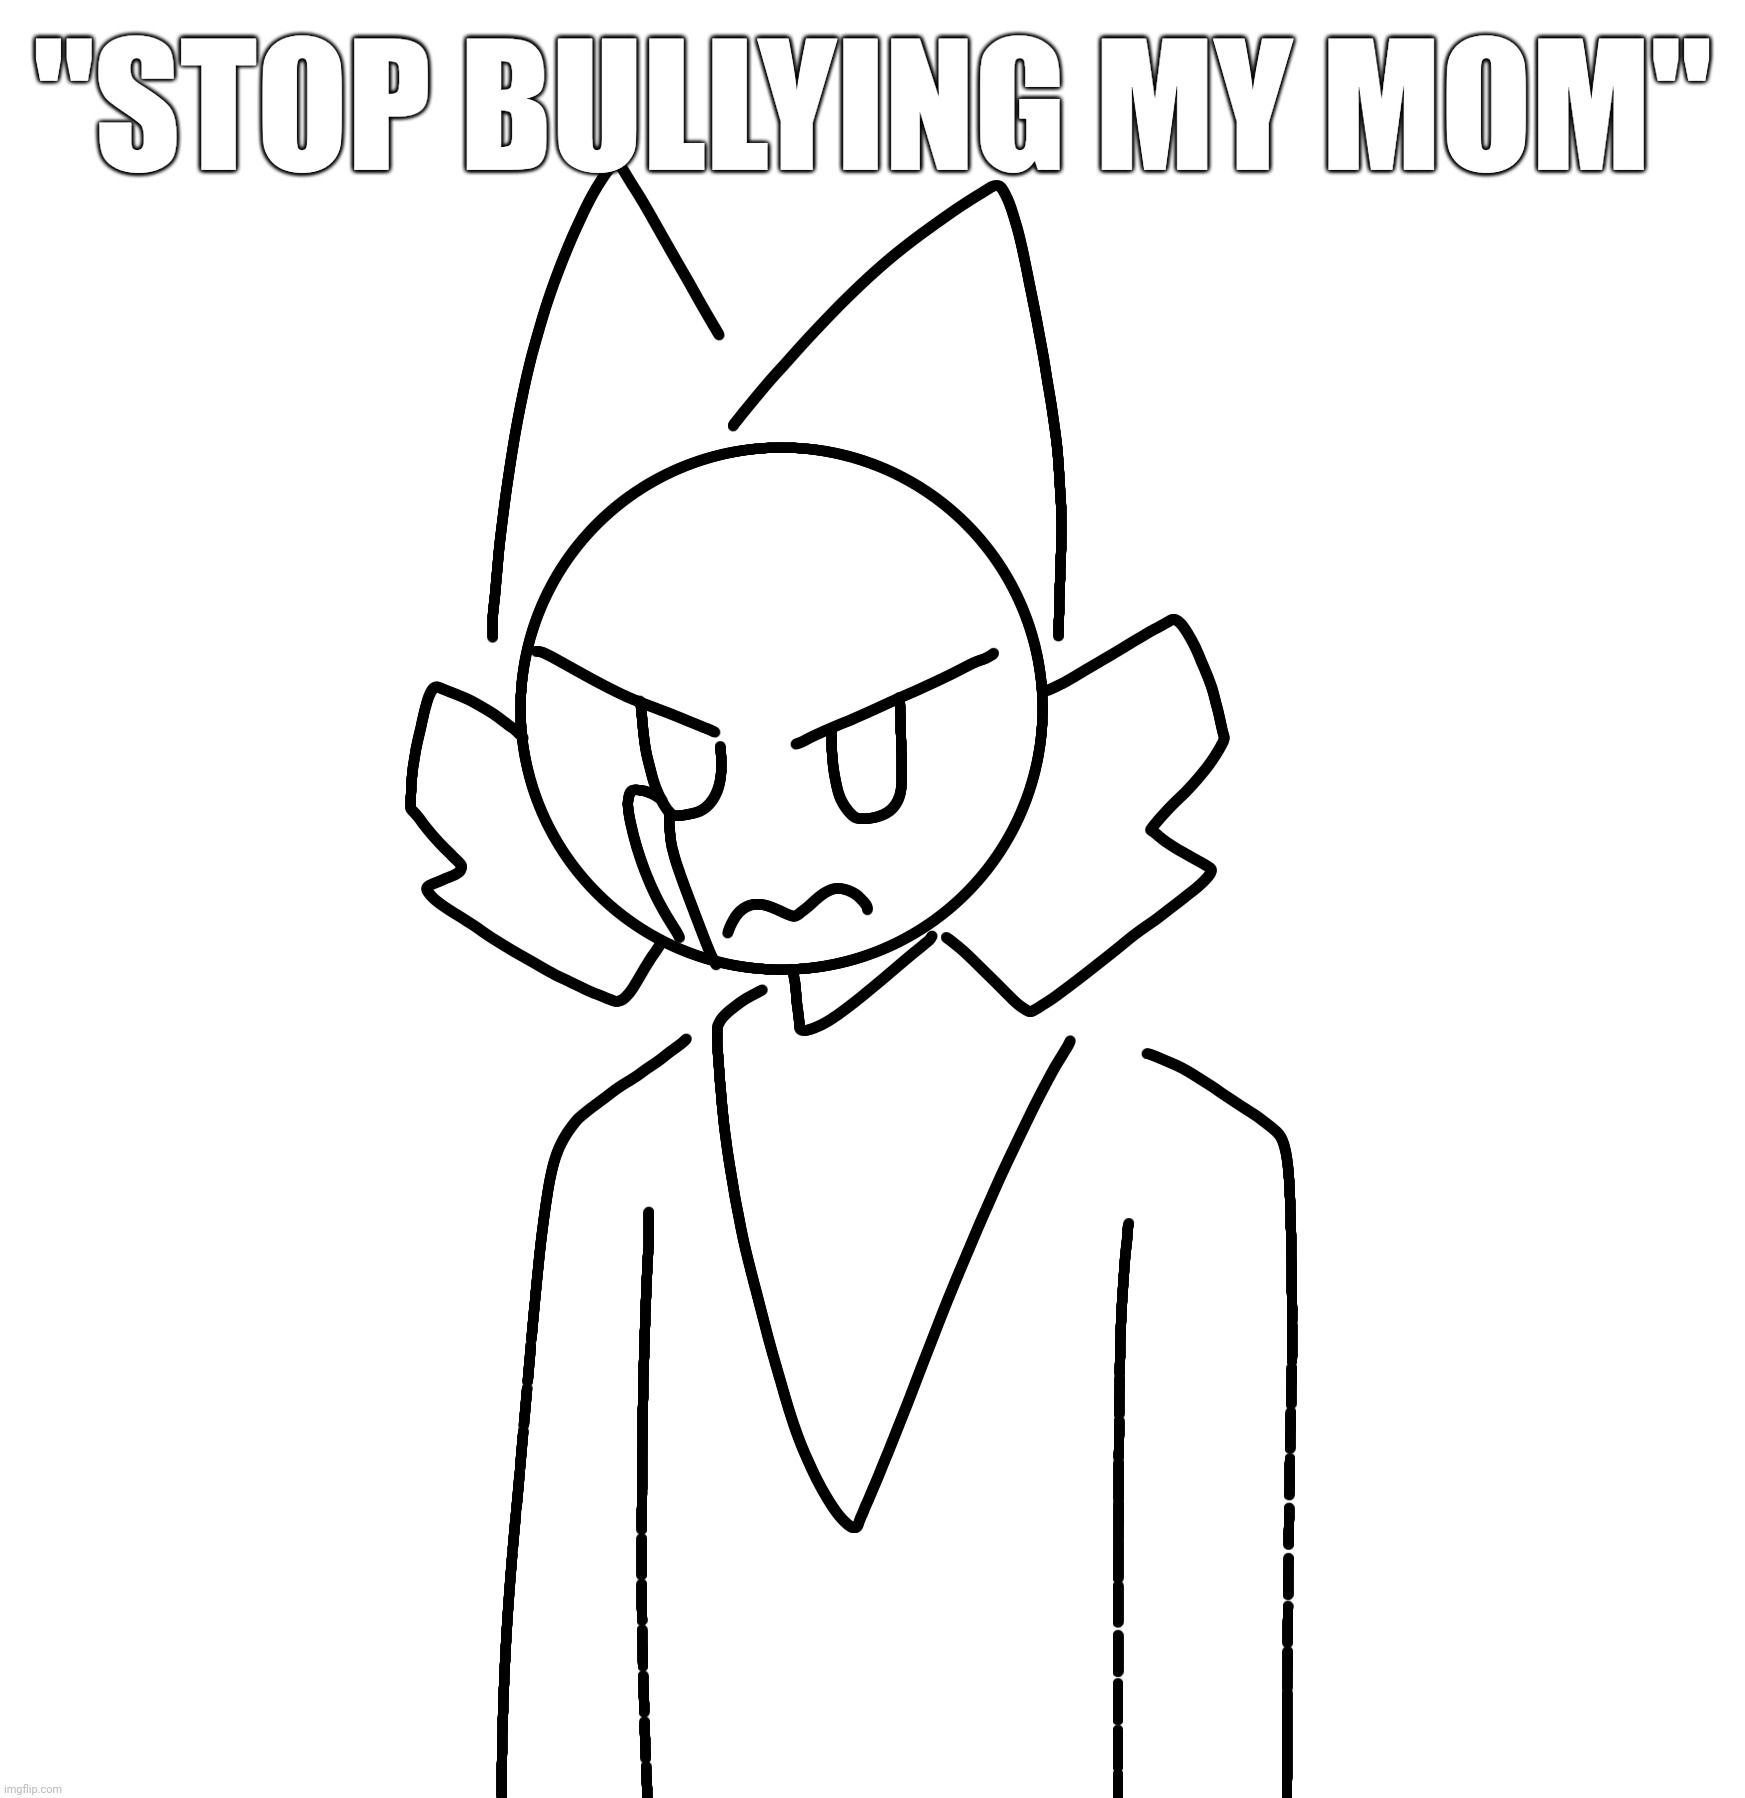 A message from clipz | "STOP BULLYING MY MOM" | made w/ Imgflip meme maker